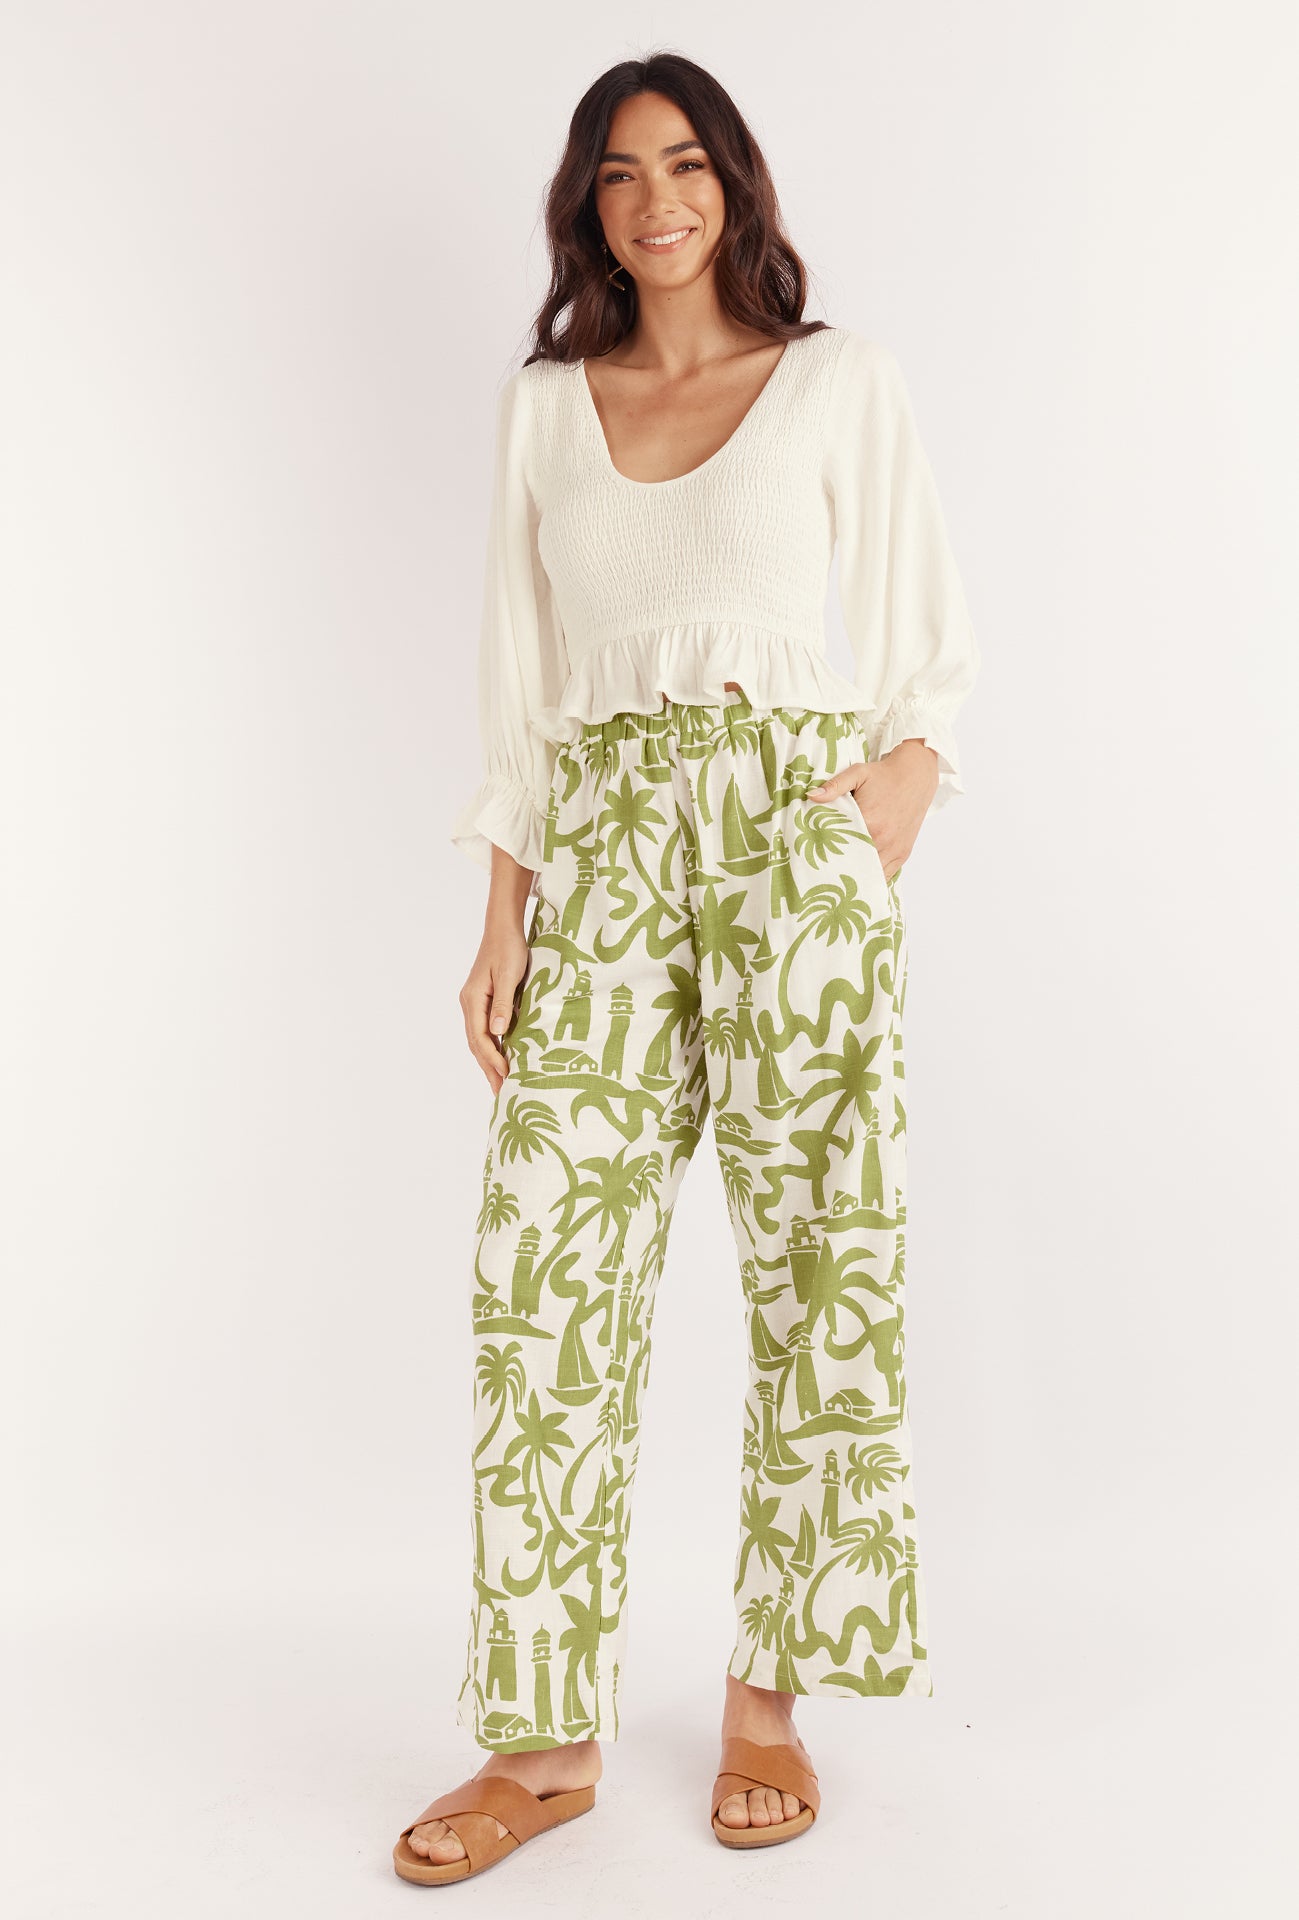 ORCHID CROP - WHITE